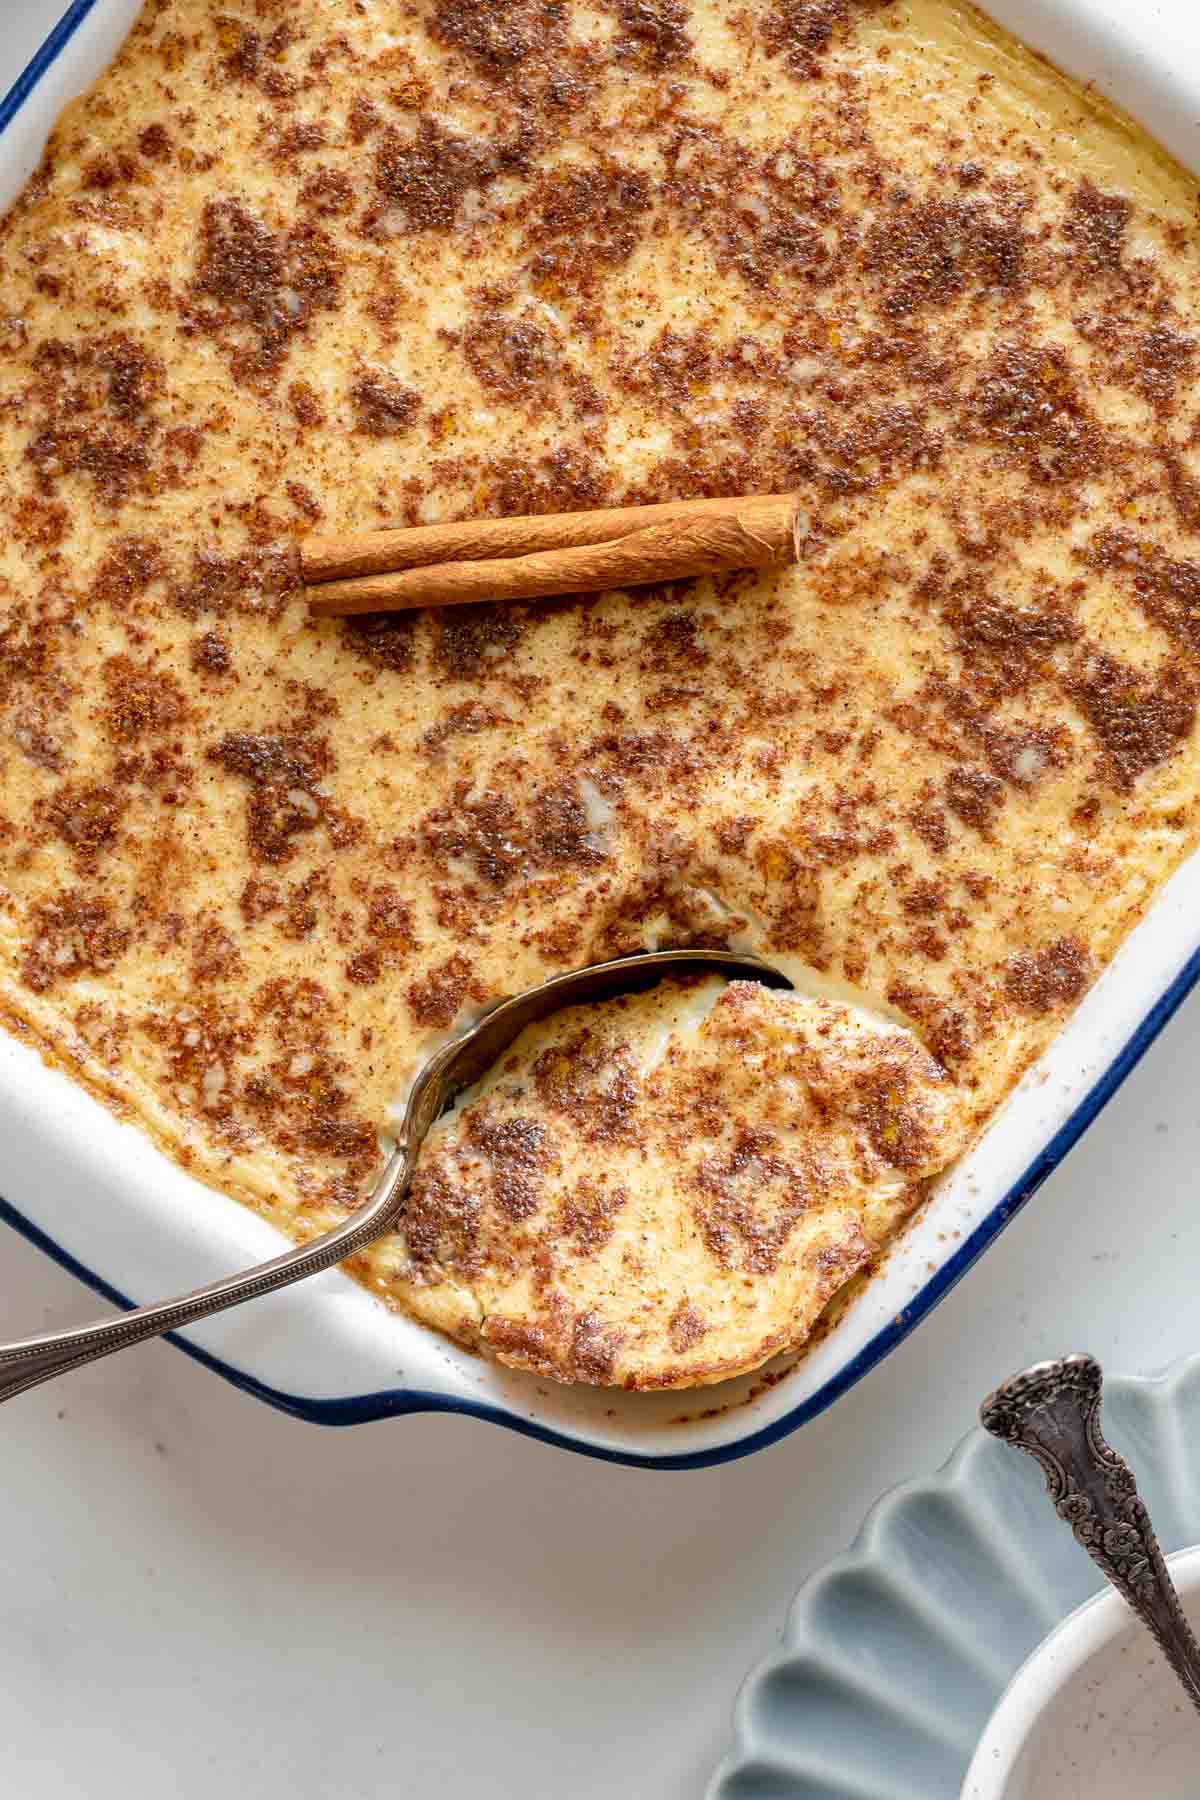 Baked Rice Pudding cooked pudding in a baking dish with spoon